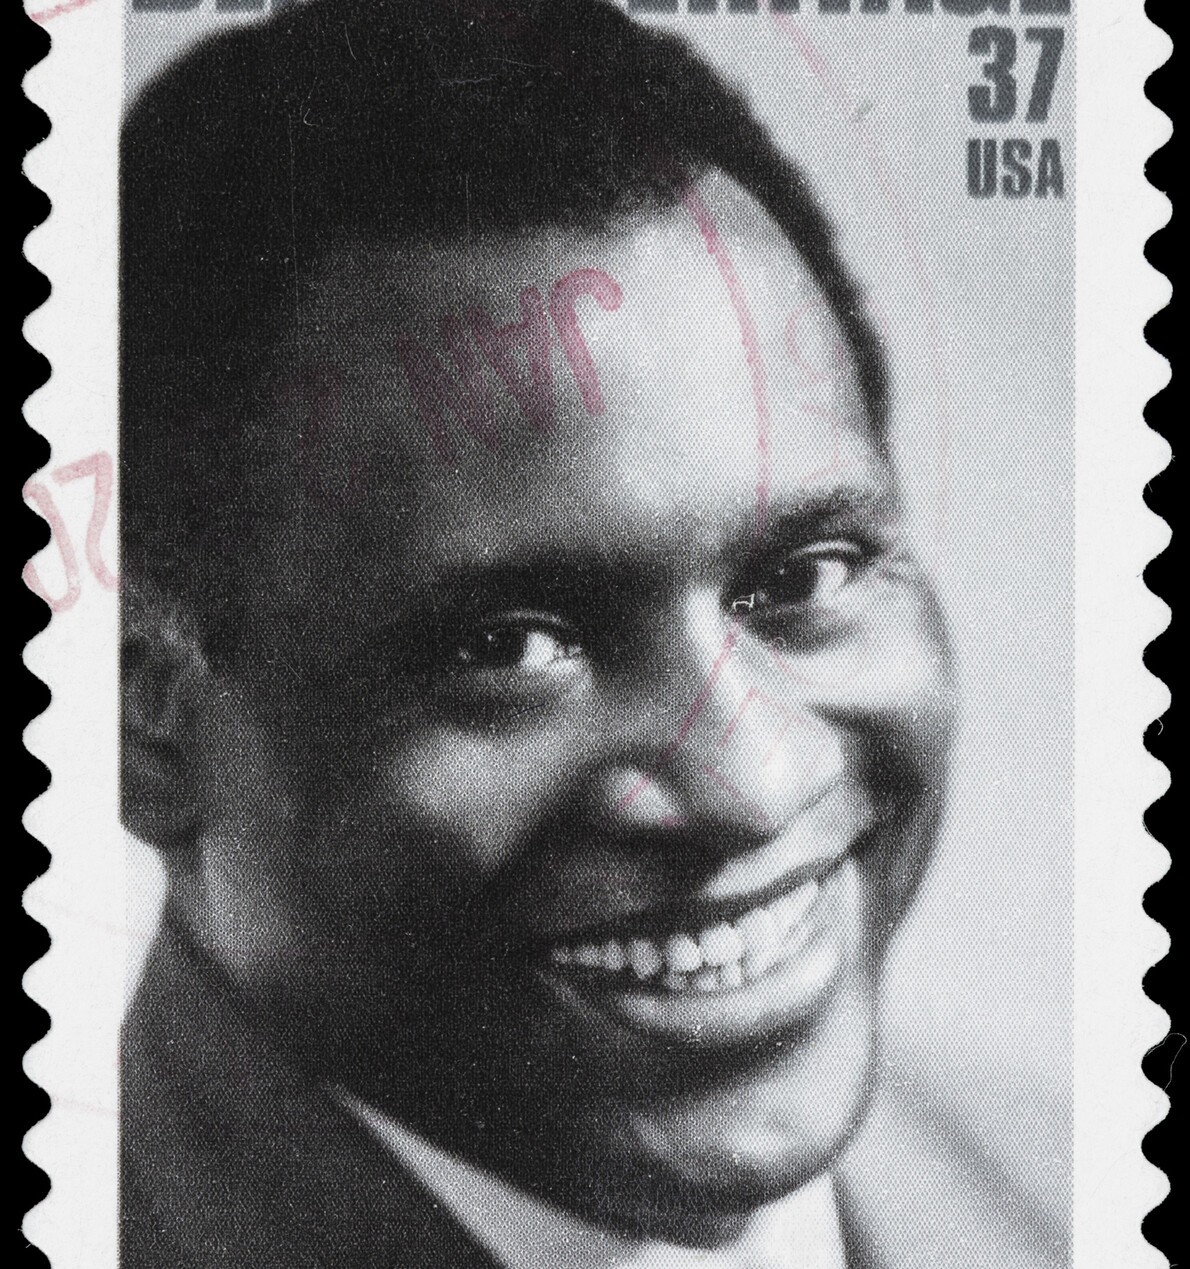 robeson stamp